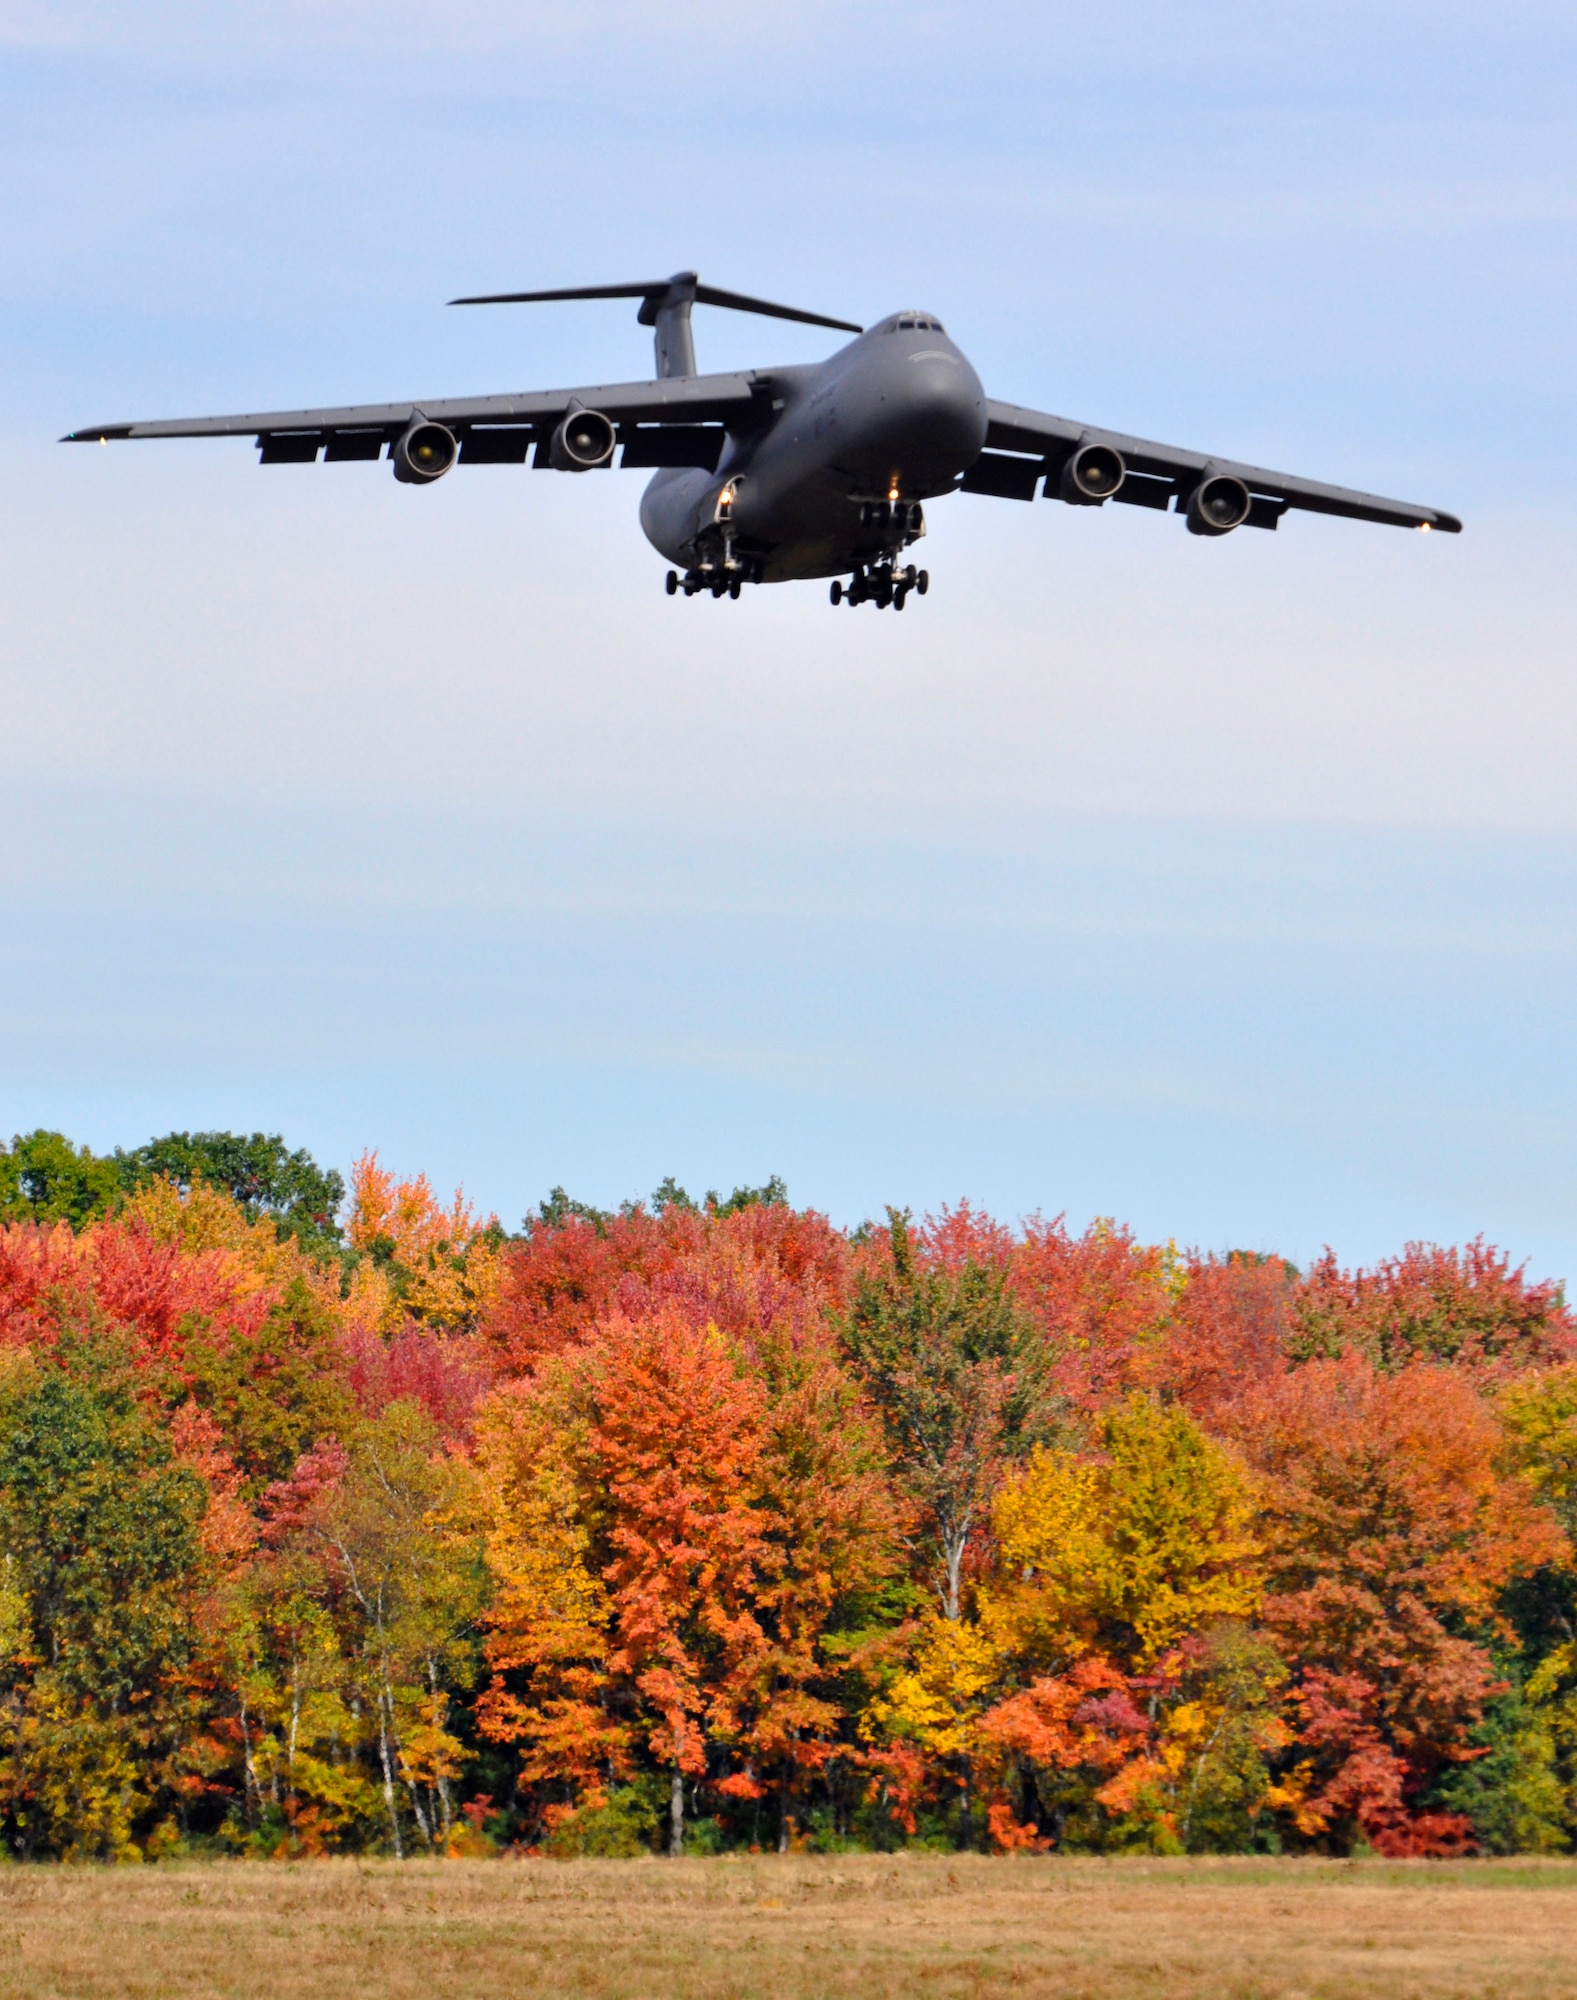 A C-5 Galaxy approaches Westover for landing over fall foliage colors on October 11, 2011. Six of Westover's C-5 transport jets and air crews with Westover's 337th Airlift Squadron participated in an Air Force-wide surge from October 17 to 21. (U.S. Air Force photo/SrA. Kelly Galloway)